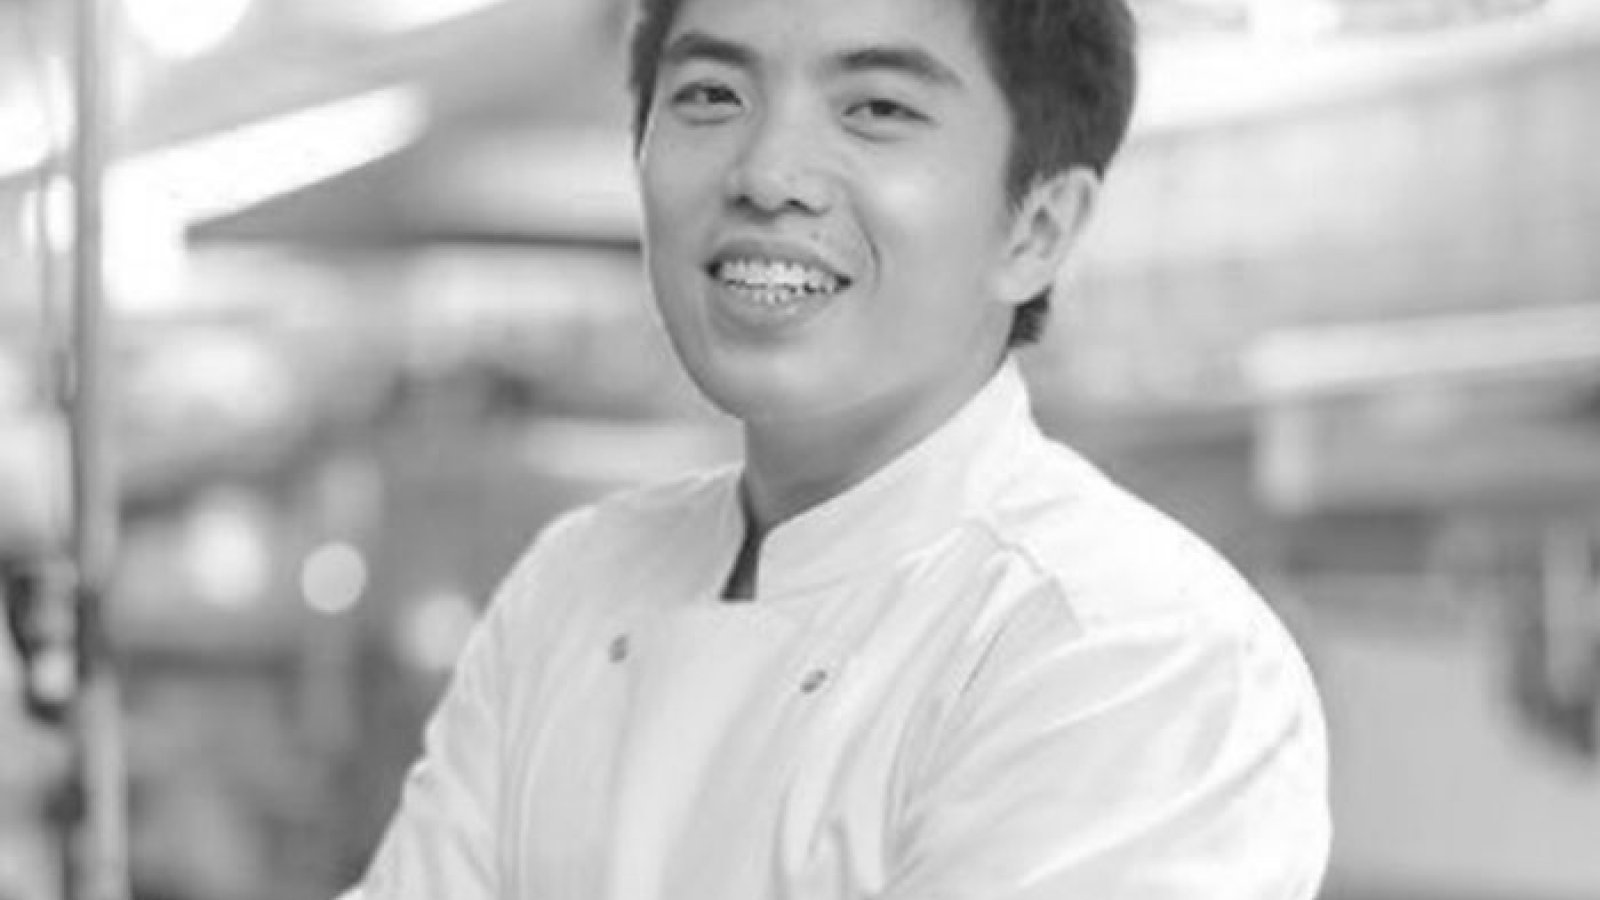 The young chef from Bangkok